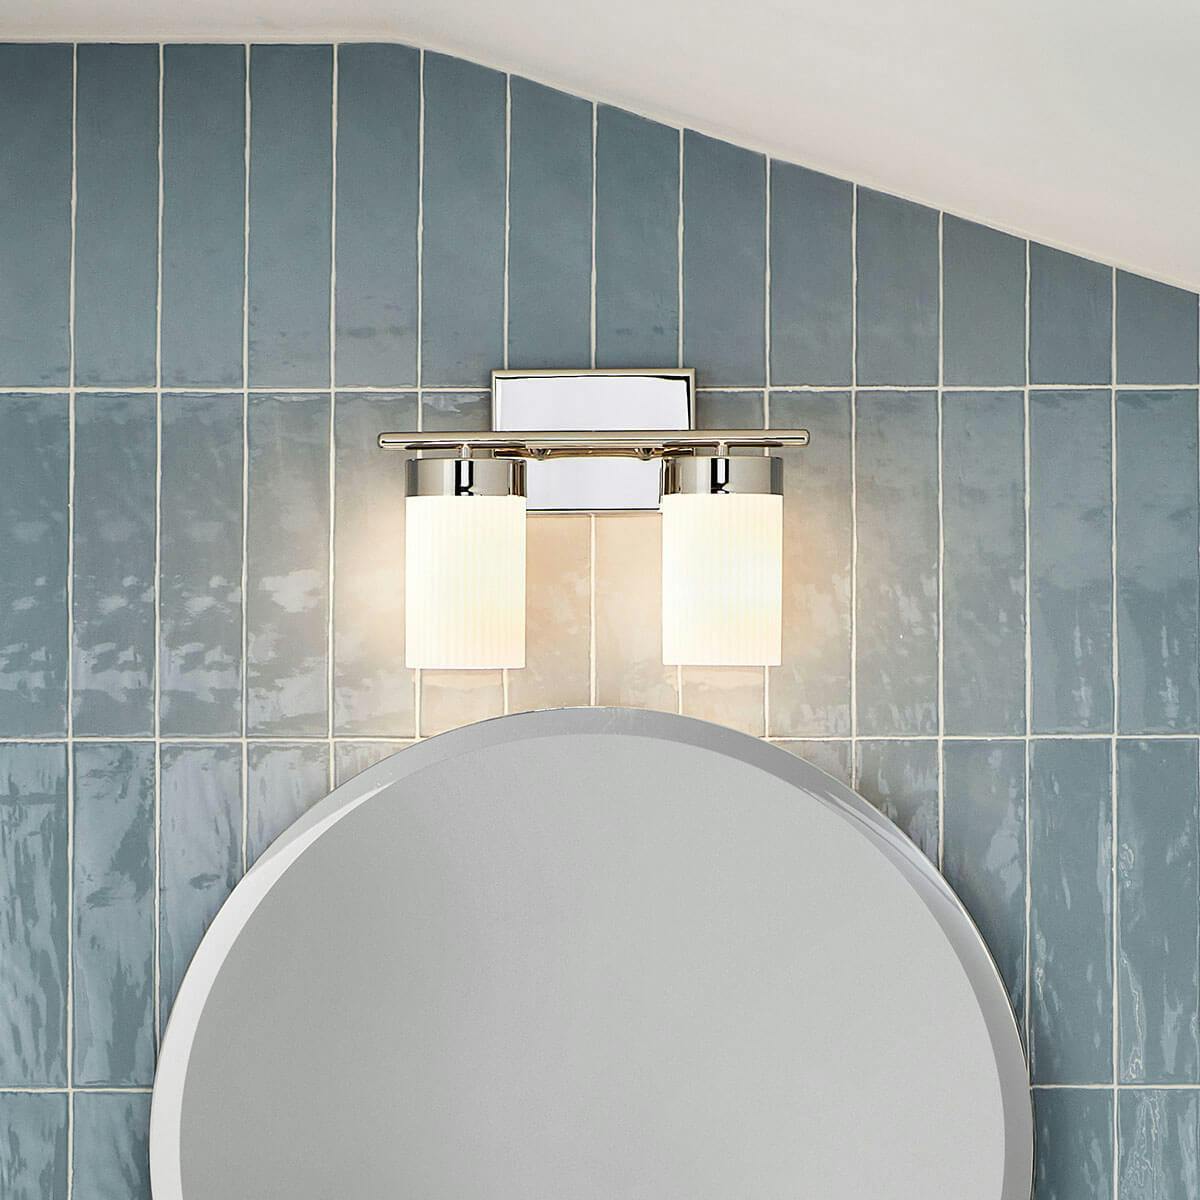 Day time Bathroom image featuring Cosabella vanity light 55111PN